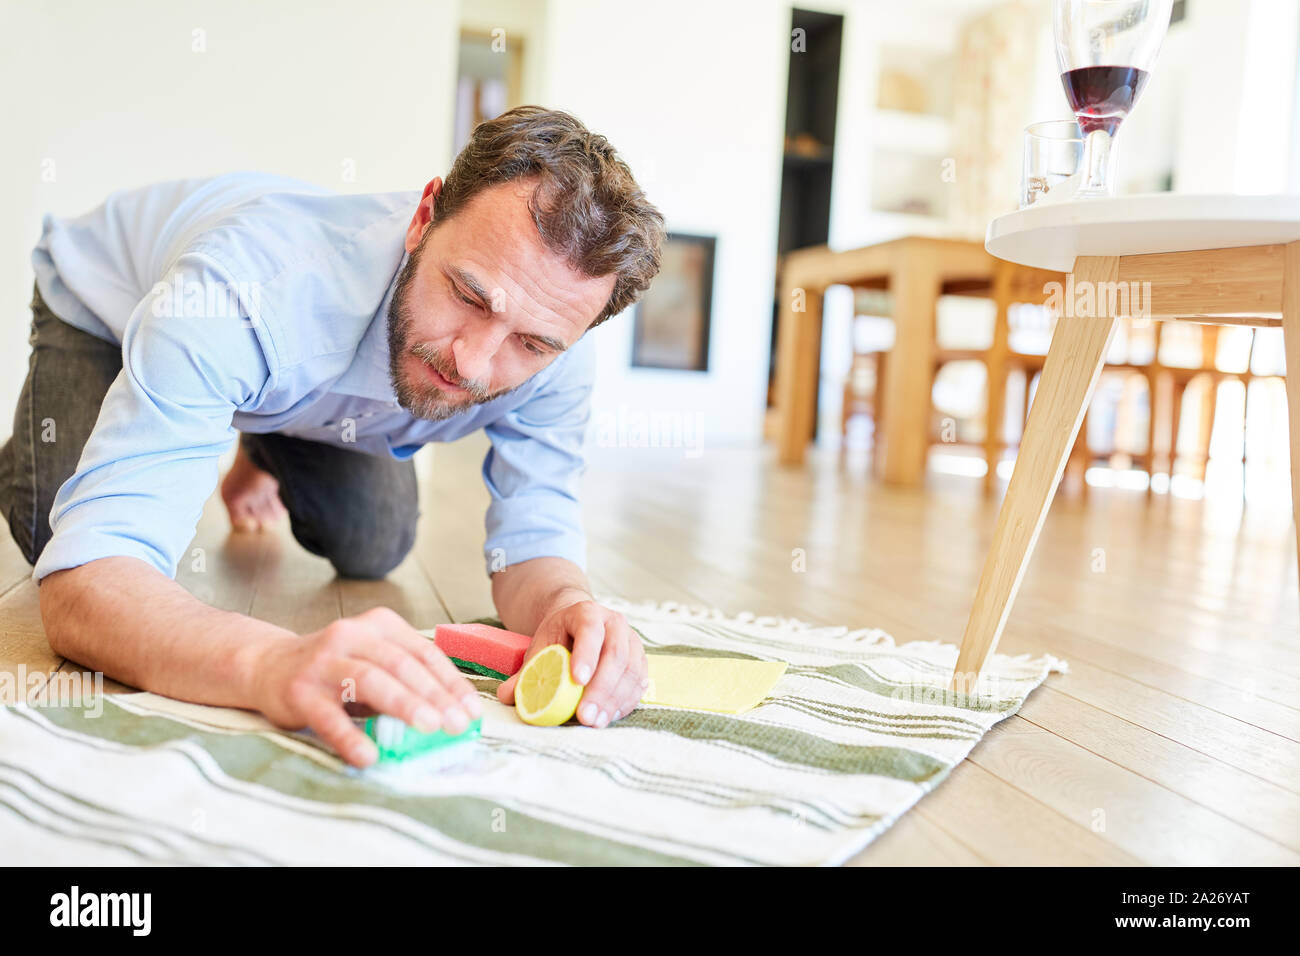 House man with lemon and salt at the red wine stain removal for role reversal Stock Photo